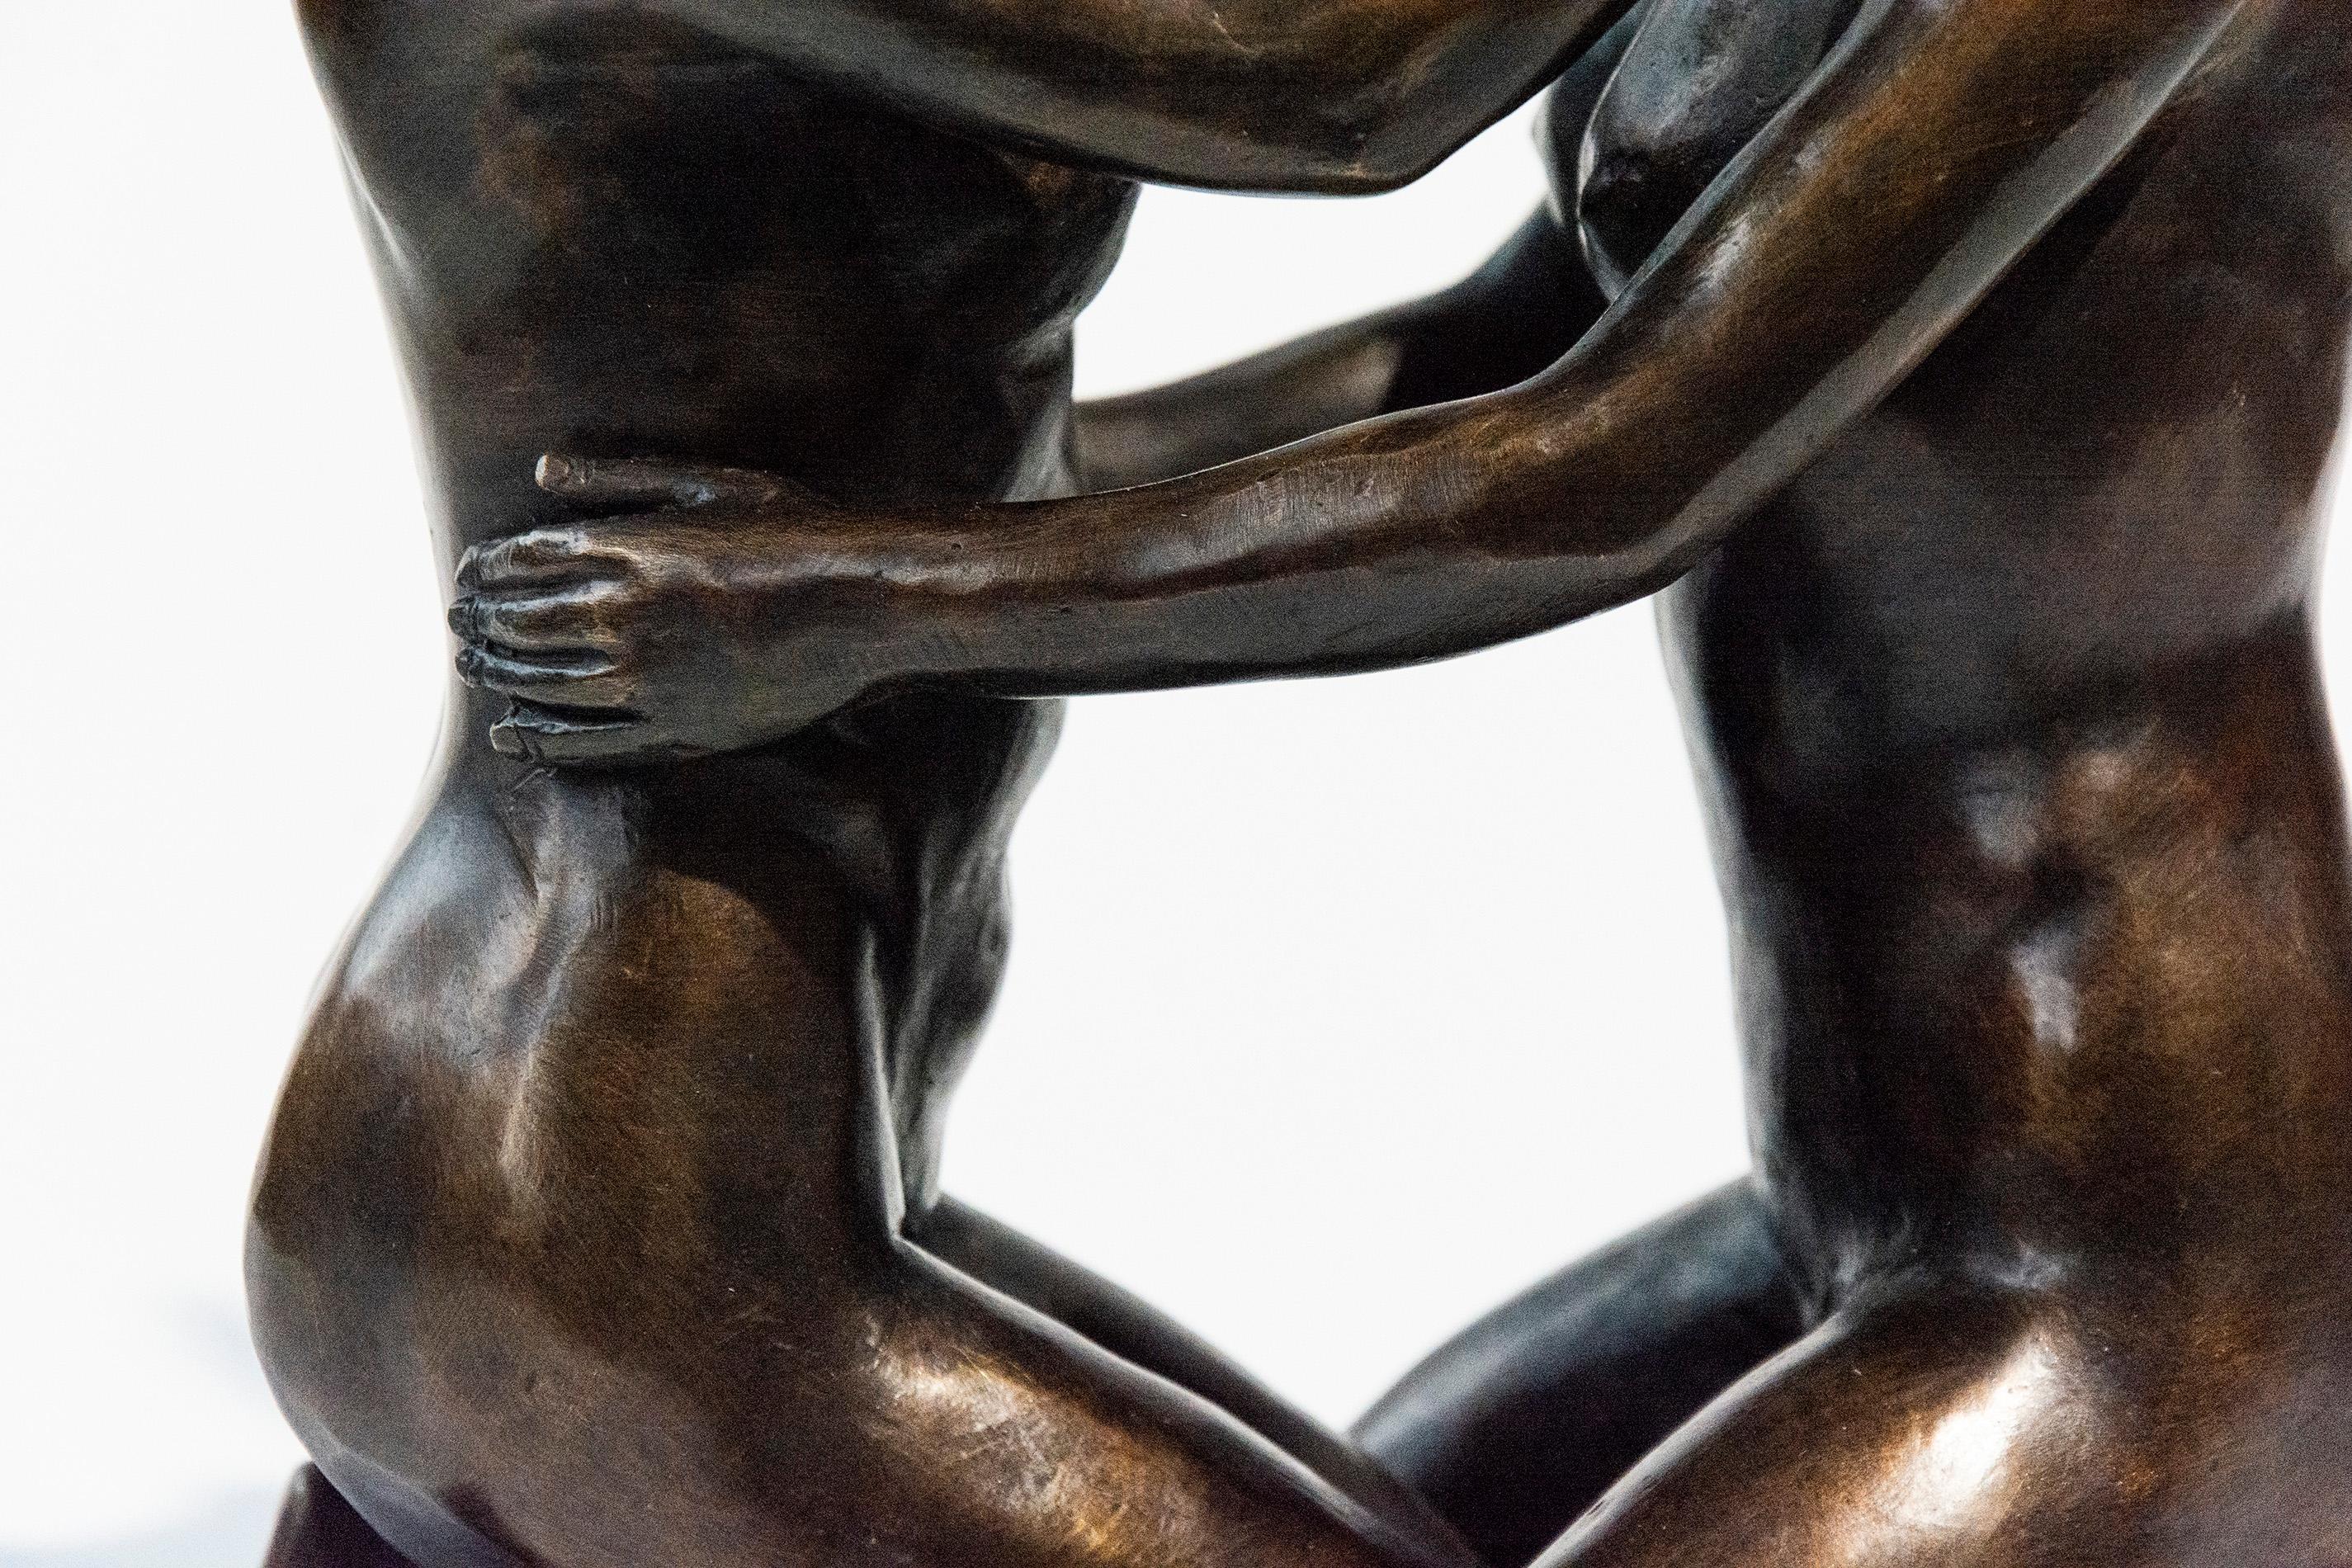 She loved being in love 7/30 - playful, figurative bronze sculpture For Sale 2